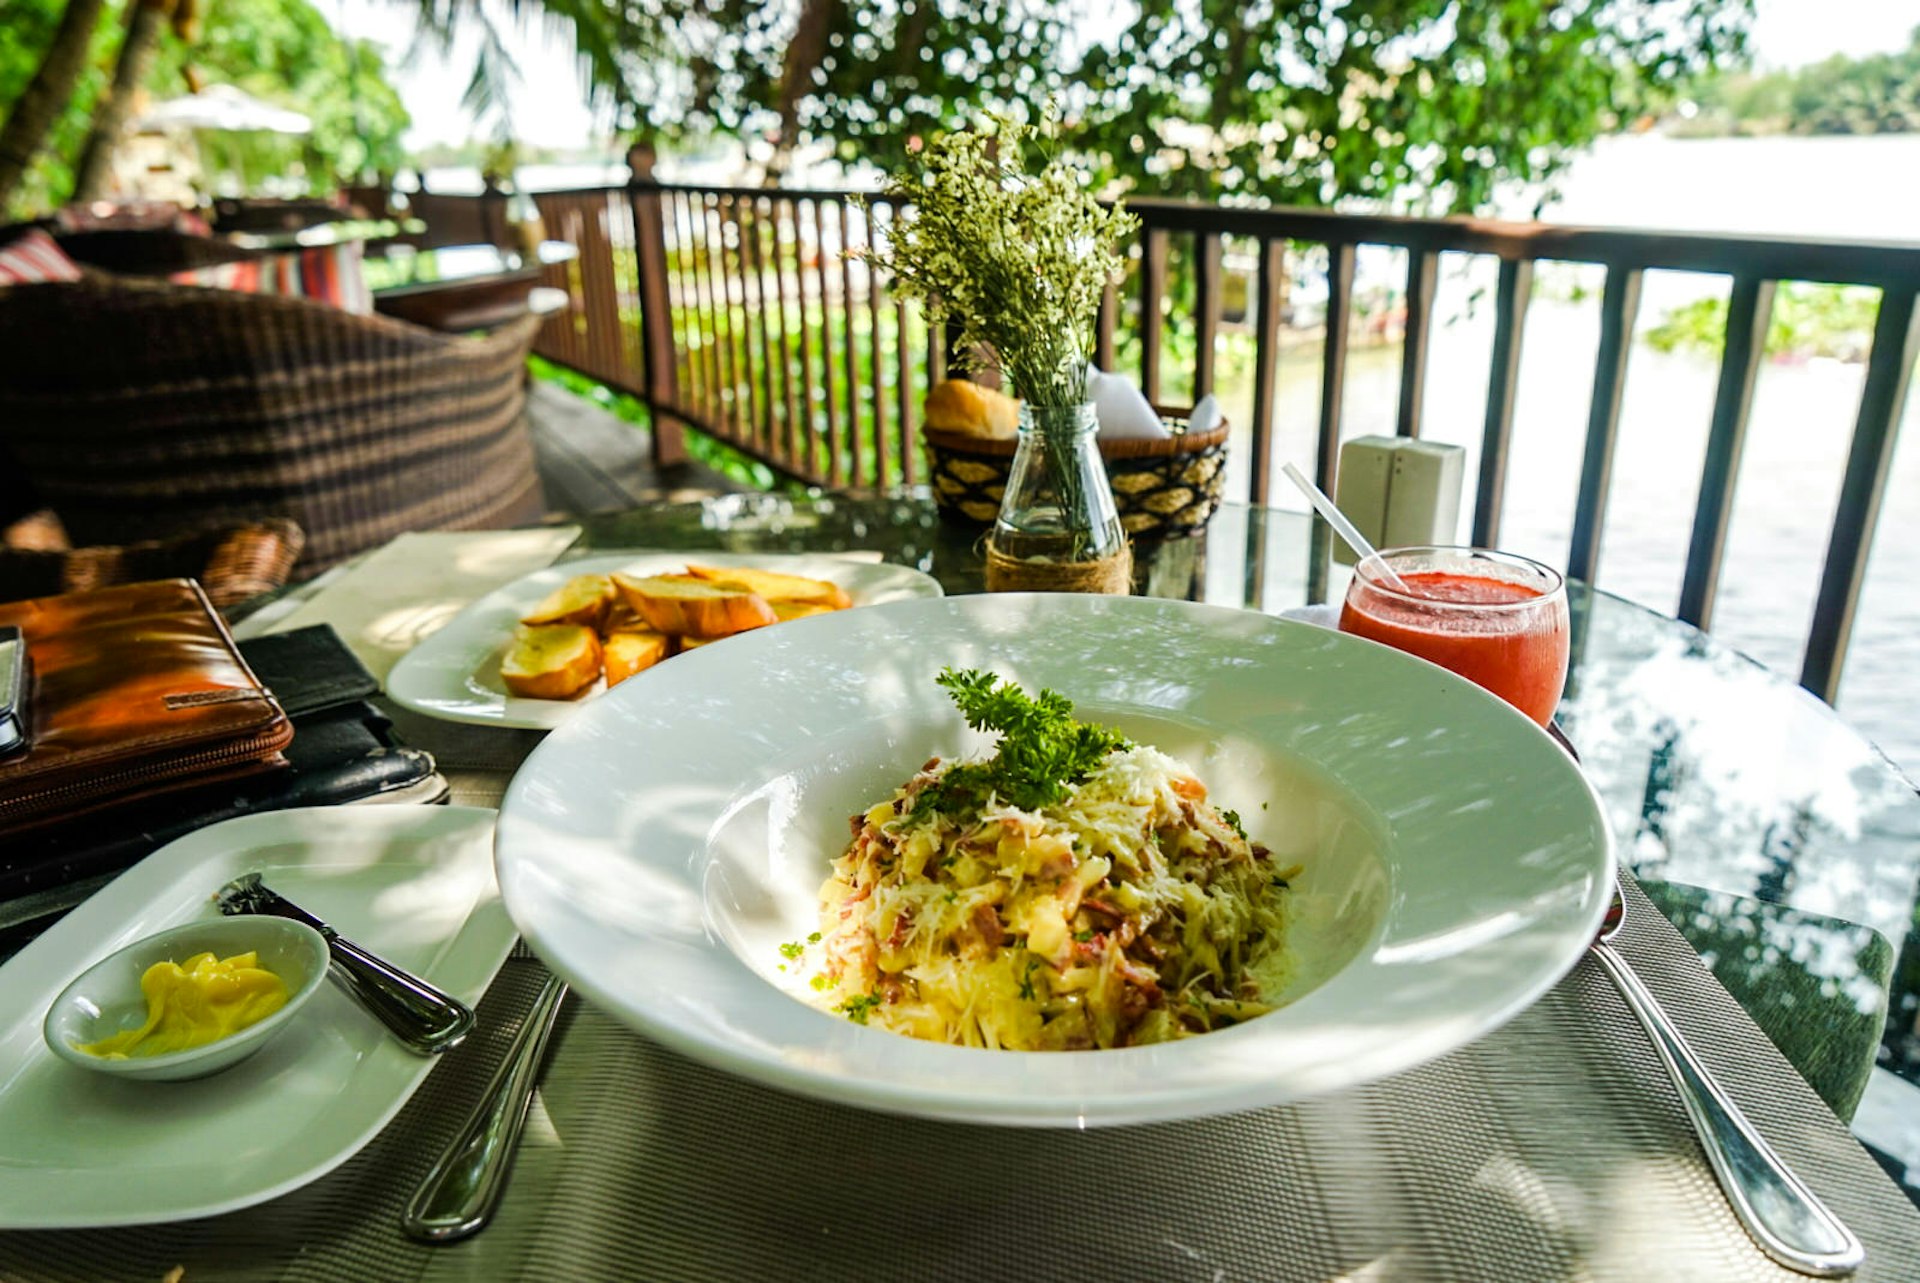 A dish of spaghetti carbonara shown on a table overlooking the river at An Lam Retreats Saigon River